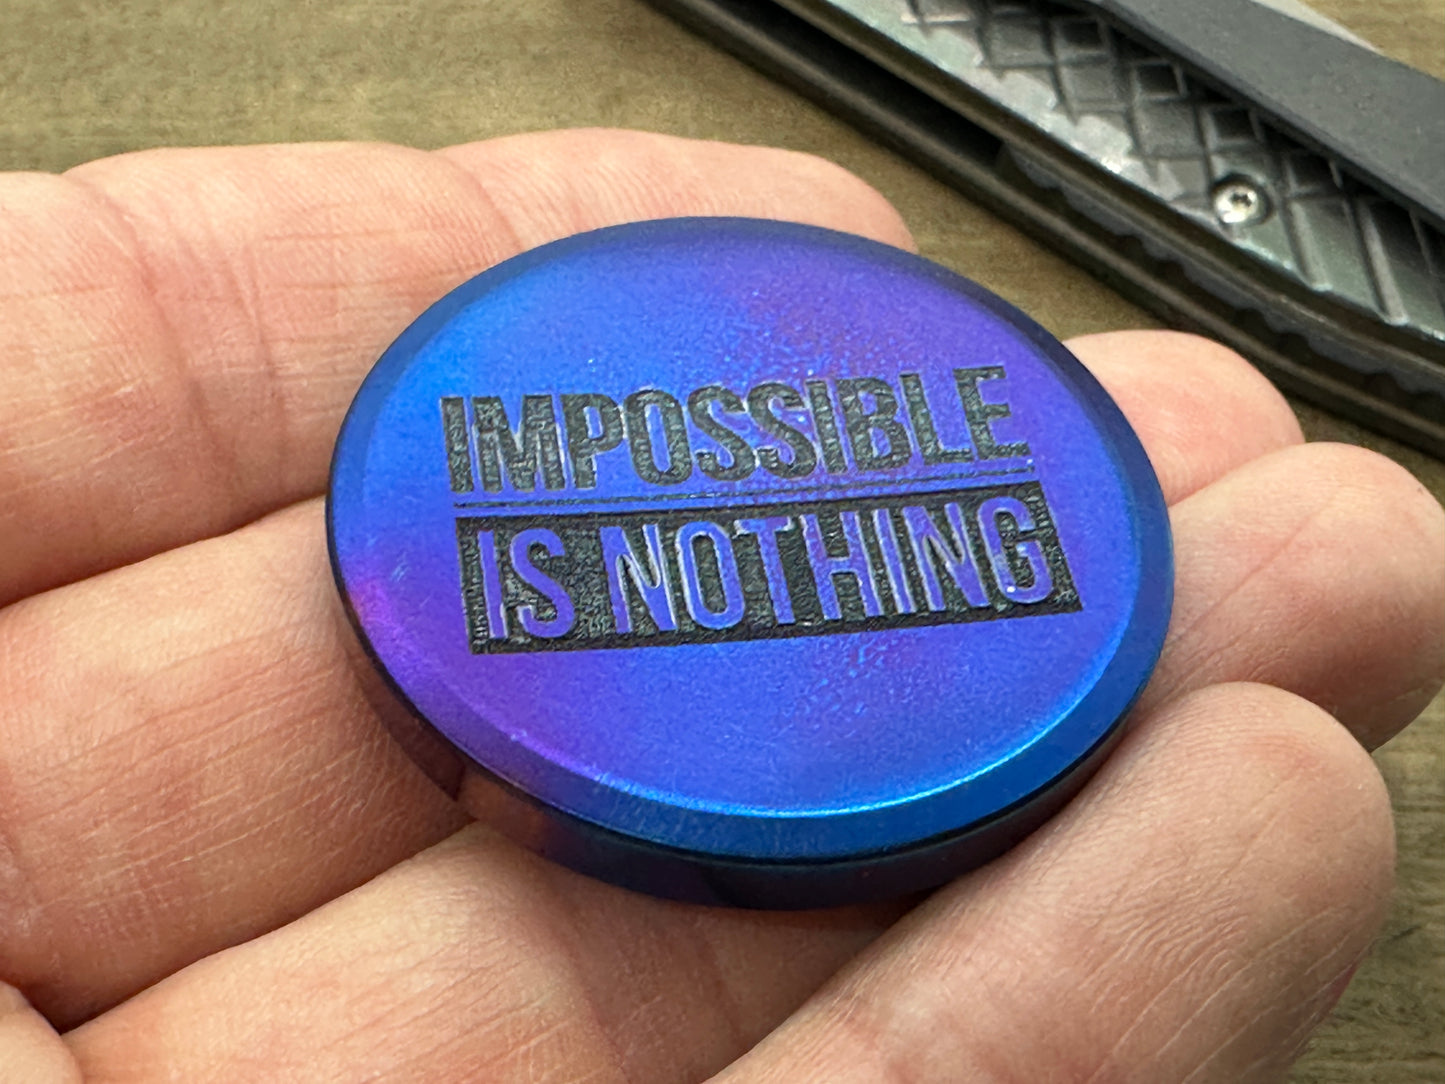 4 sizes Impossible is Nothing - Flamed Deep engraved Titanium Worry Coin